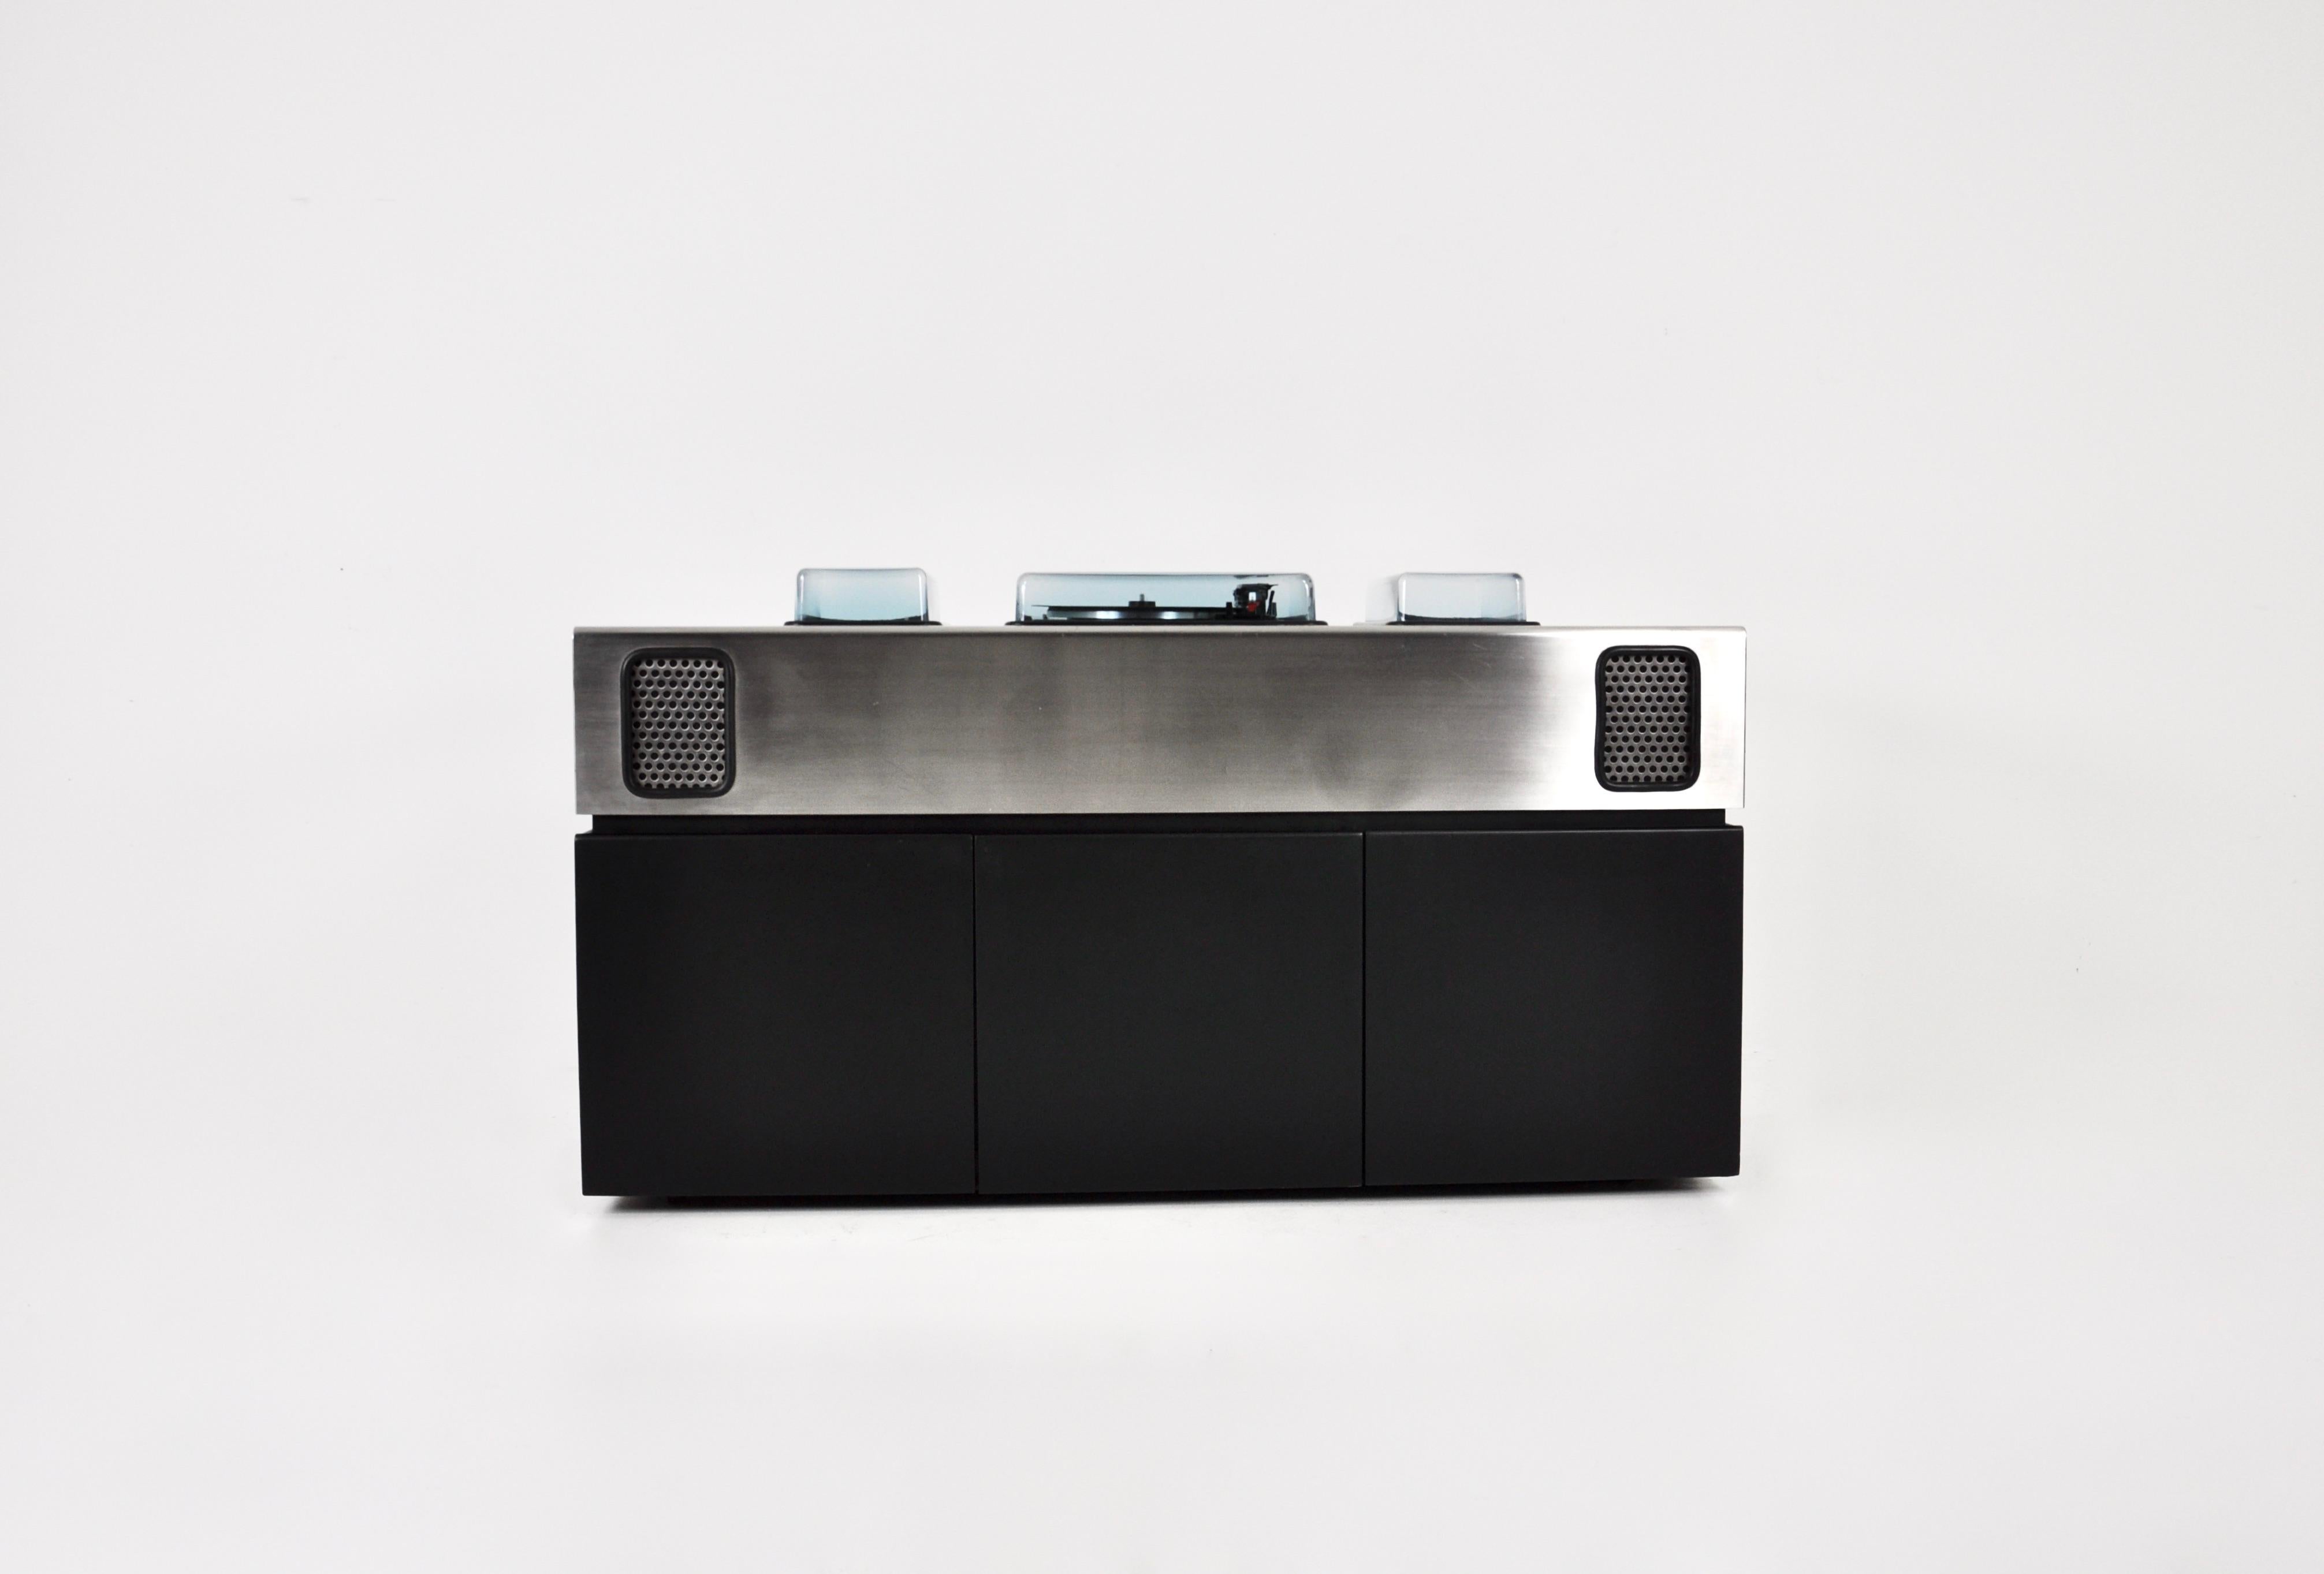 Batman record player, radio and bar by Adalberto dal Lago & Adam Tihany for Giuseppe Rossi. The top is in brushed chrome metal with integrated speakers and the underside in black wood. There are two storage drawers and a fridge in the middle.